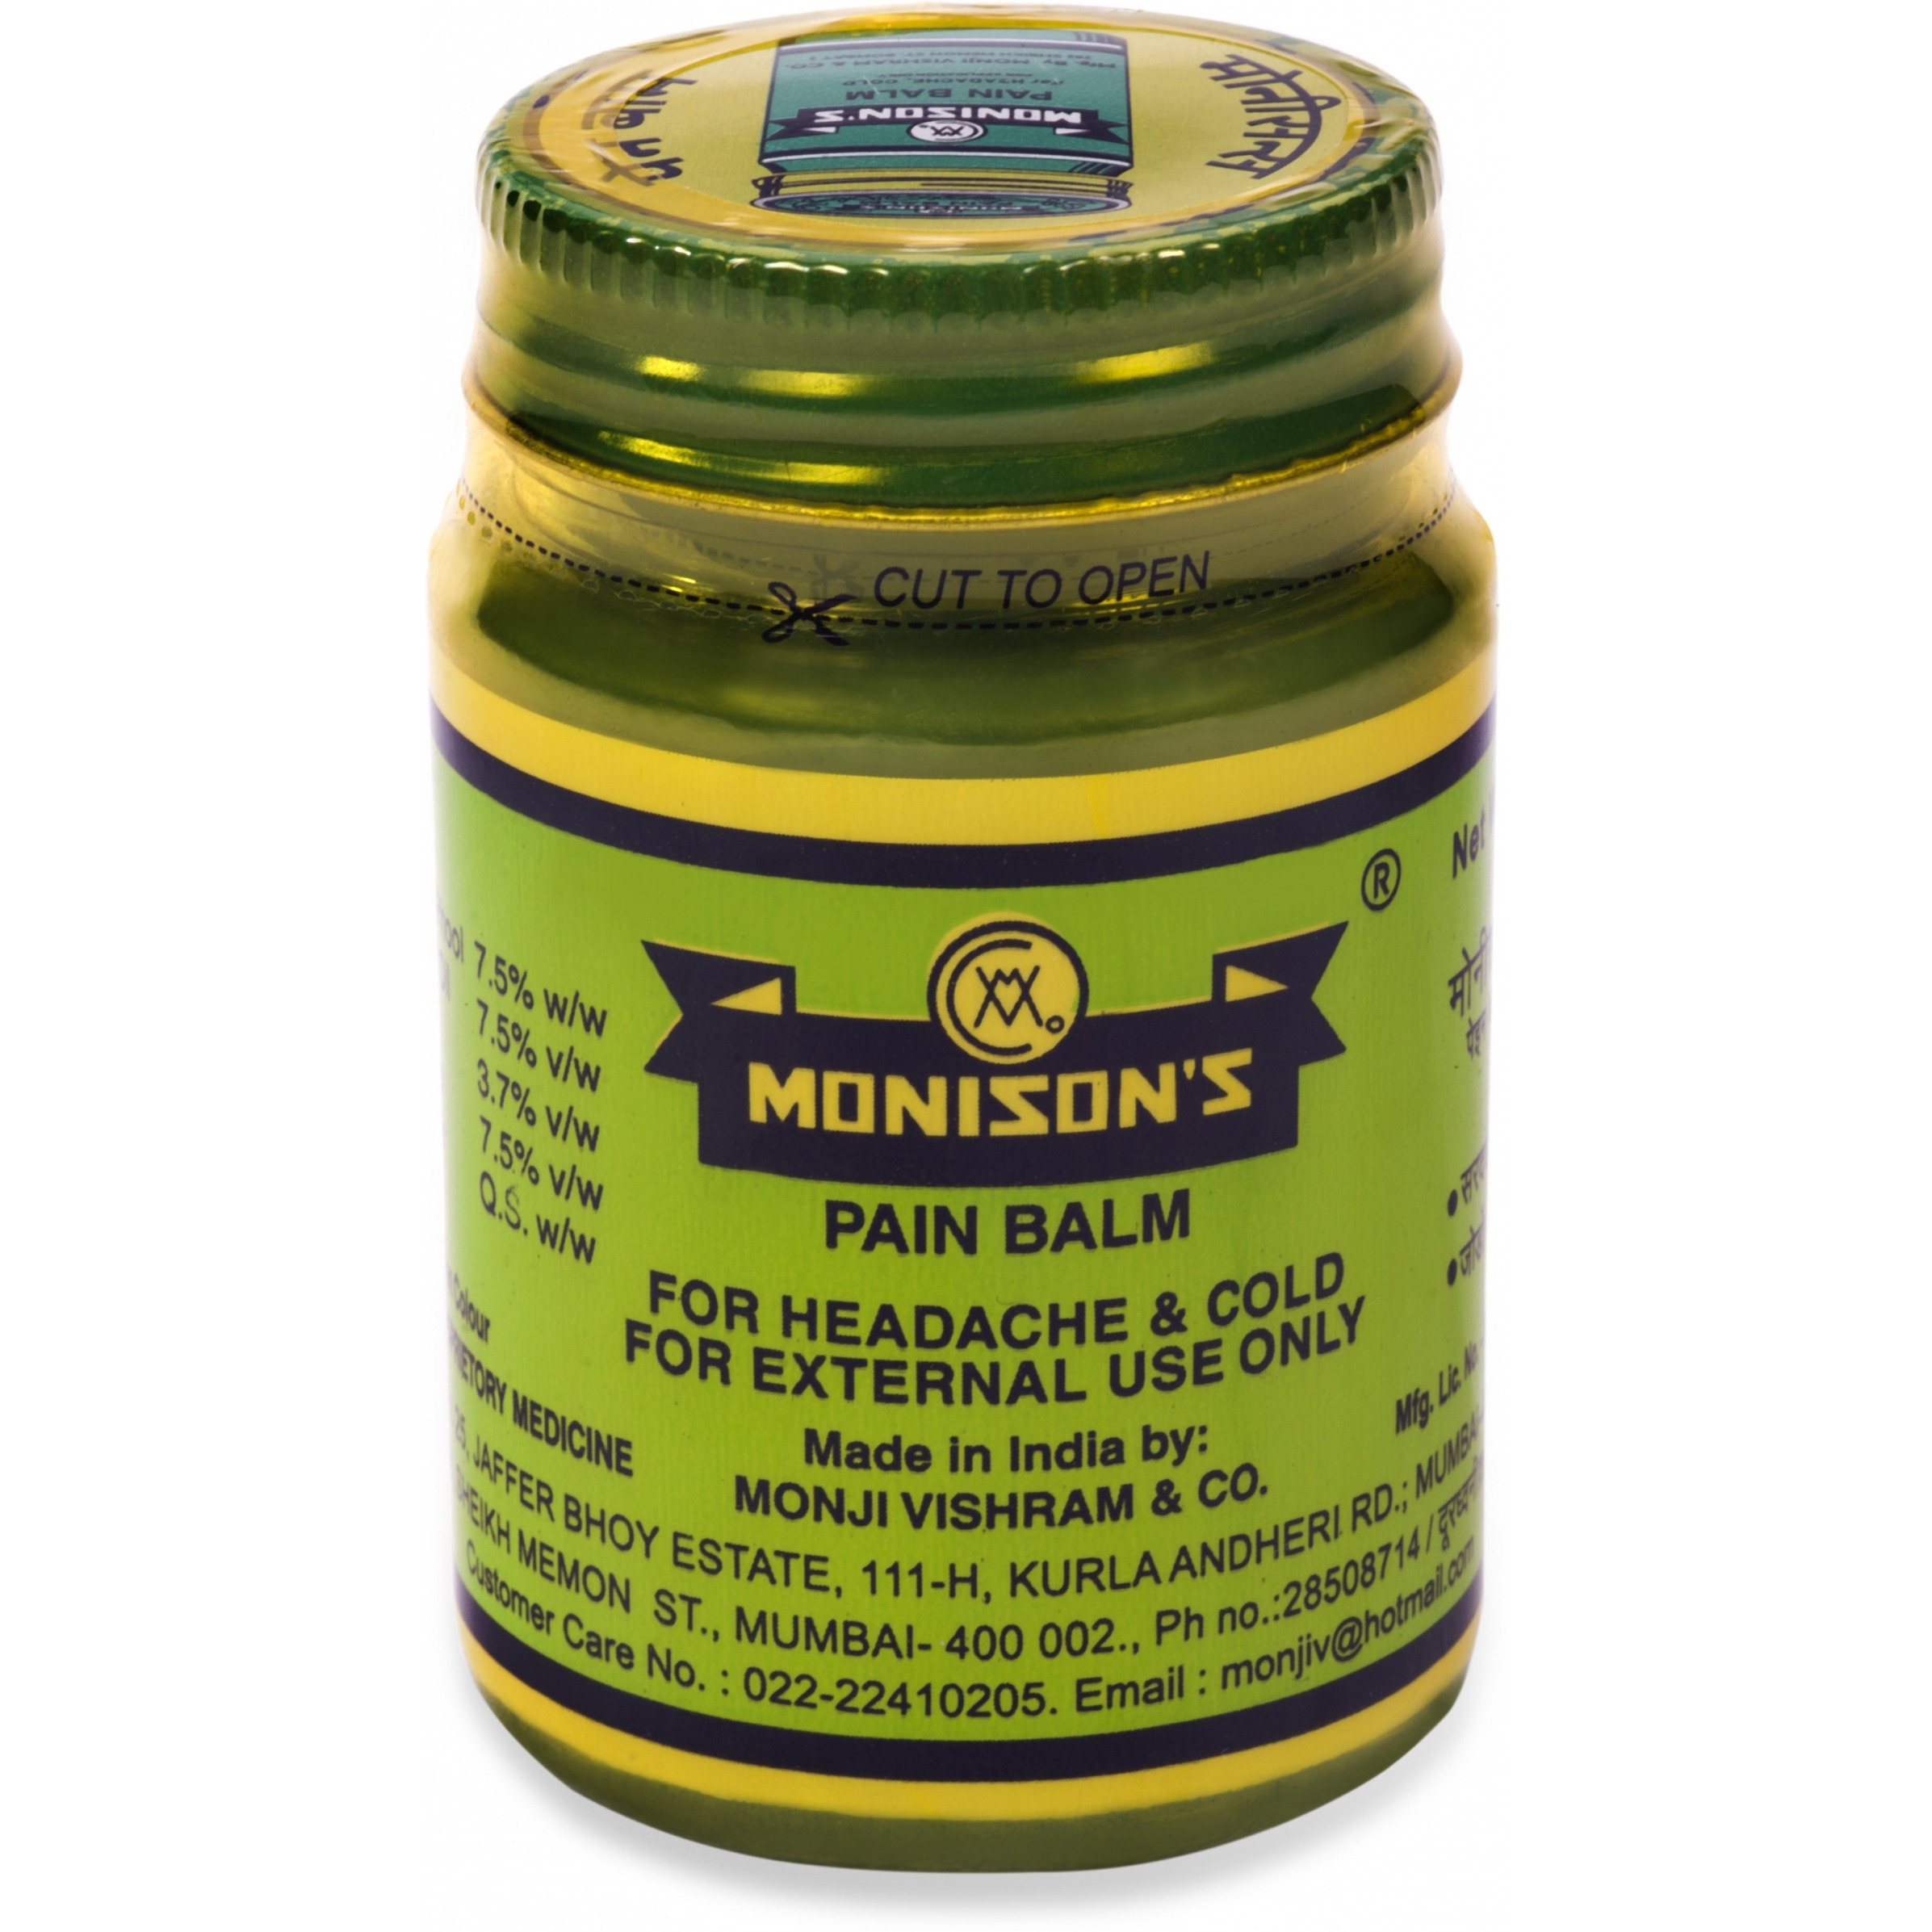 Pack of 3 - Monisons Pain Balm - 100 Gm (3.5 Oz)